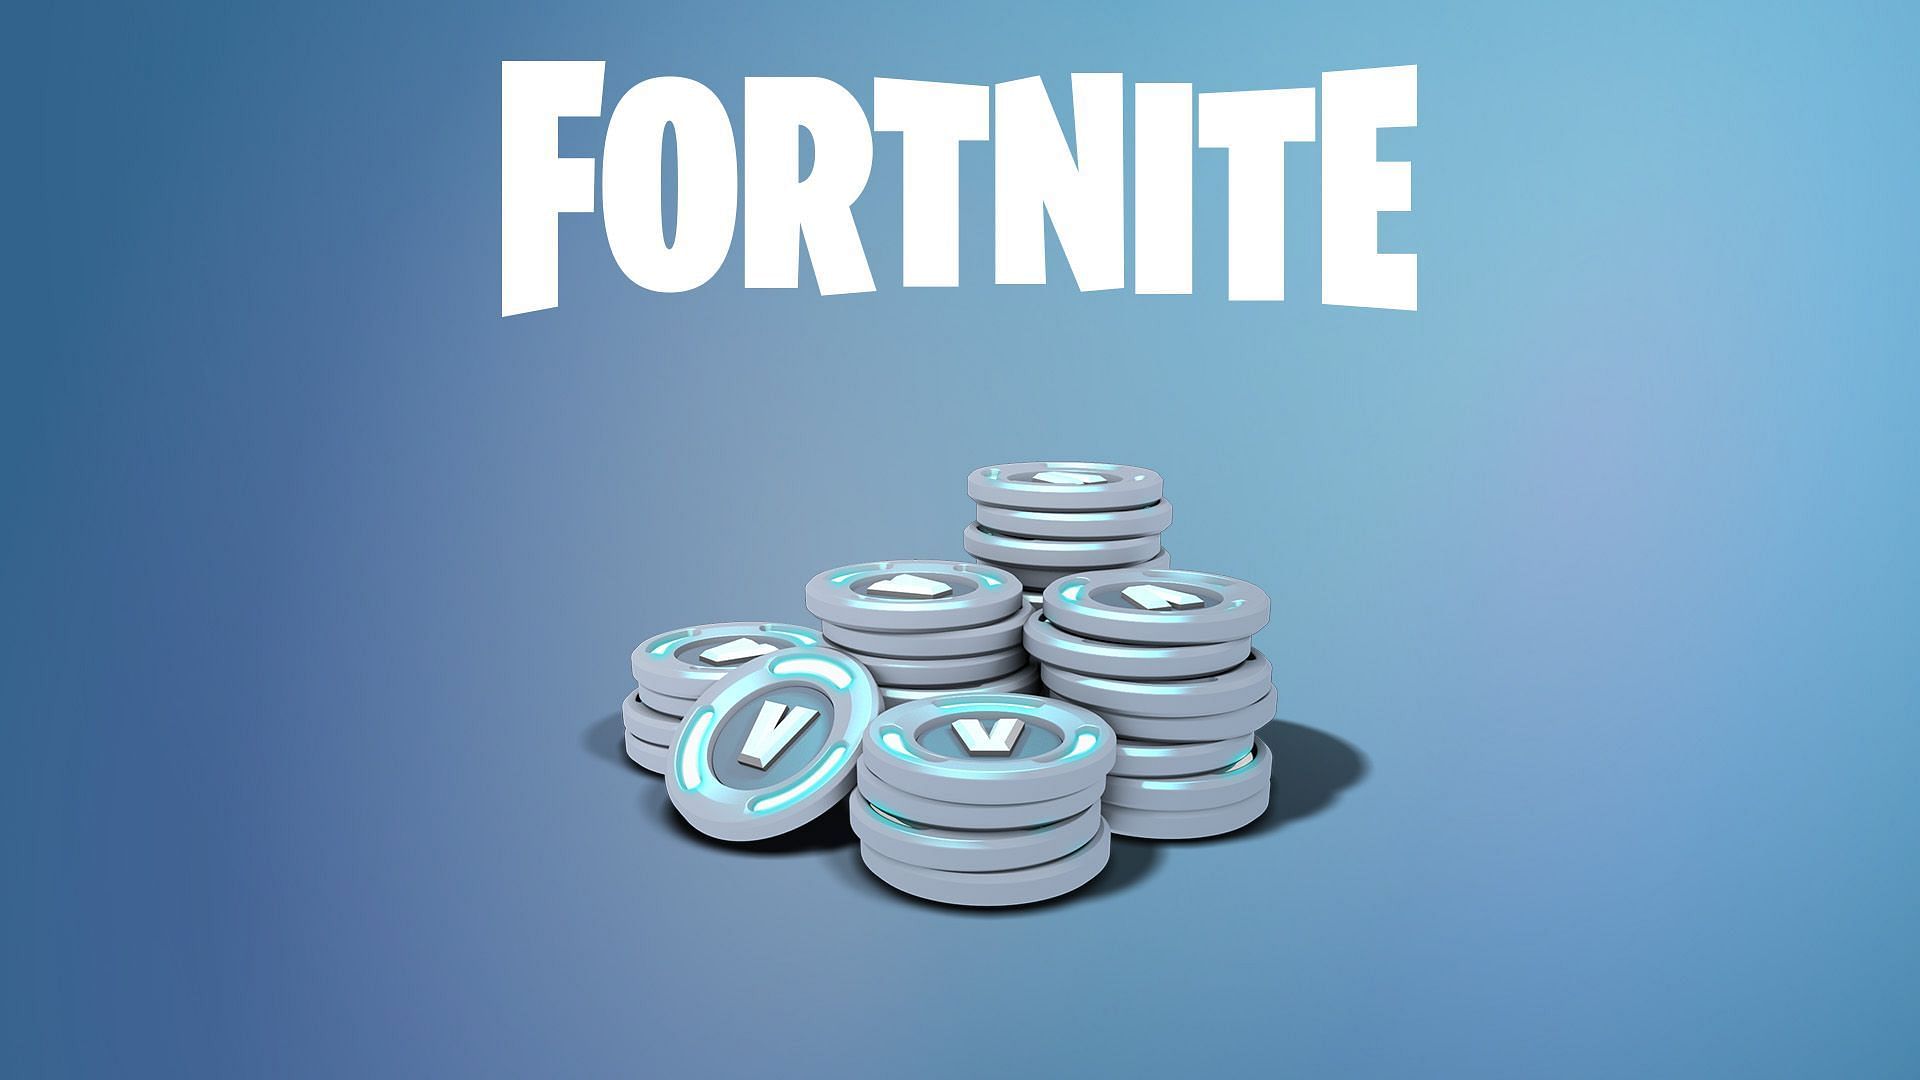 The latest V-Bucks giveaway is massive and many Fortnite players participate in it (Image via Epic Games)